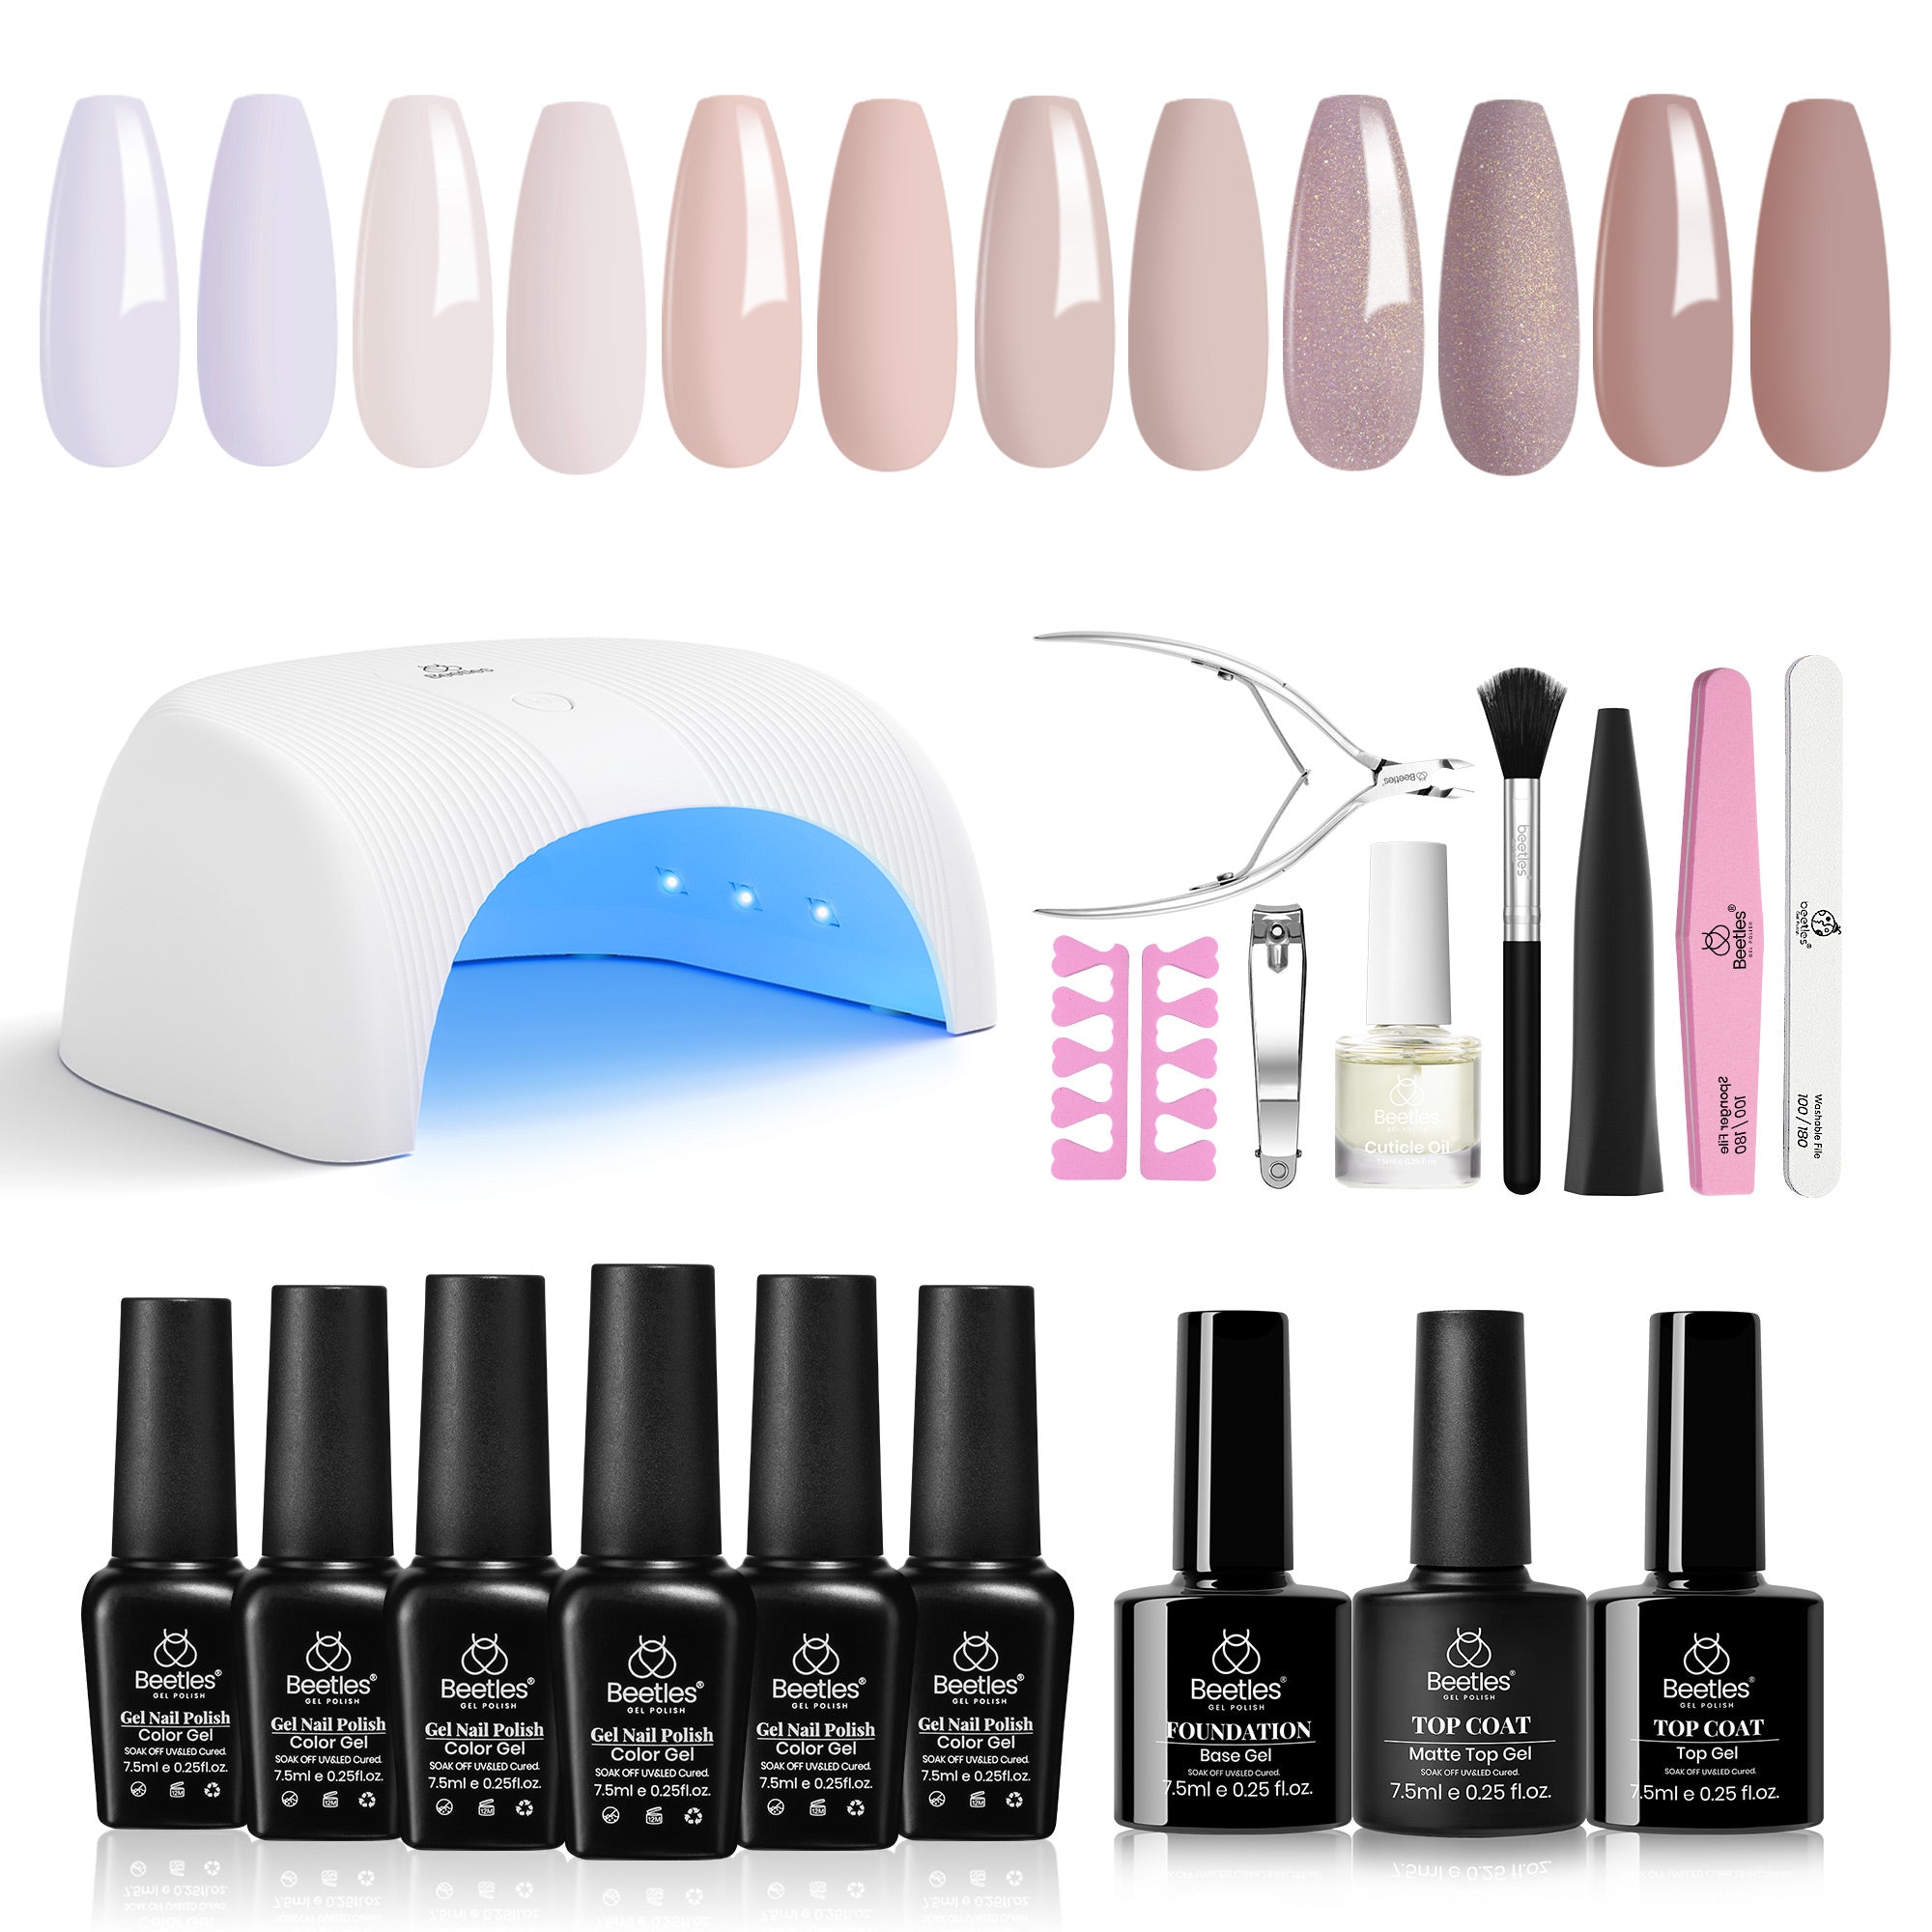 All-in-one Nail Starter Kit Gel Manicure Gift Box with 6 Shades#091